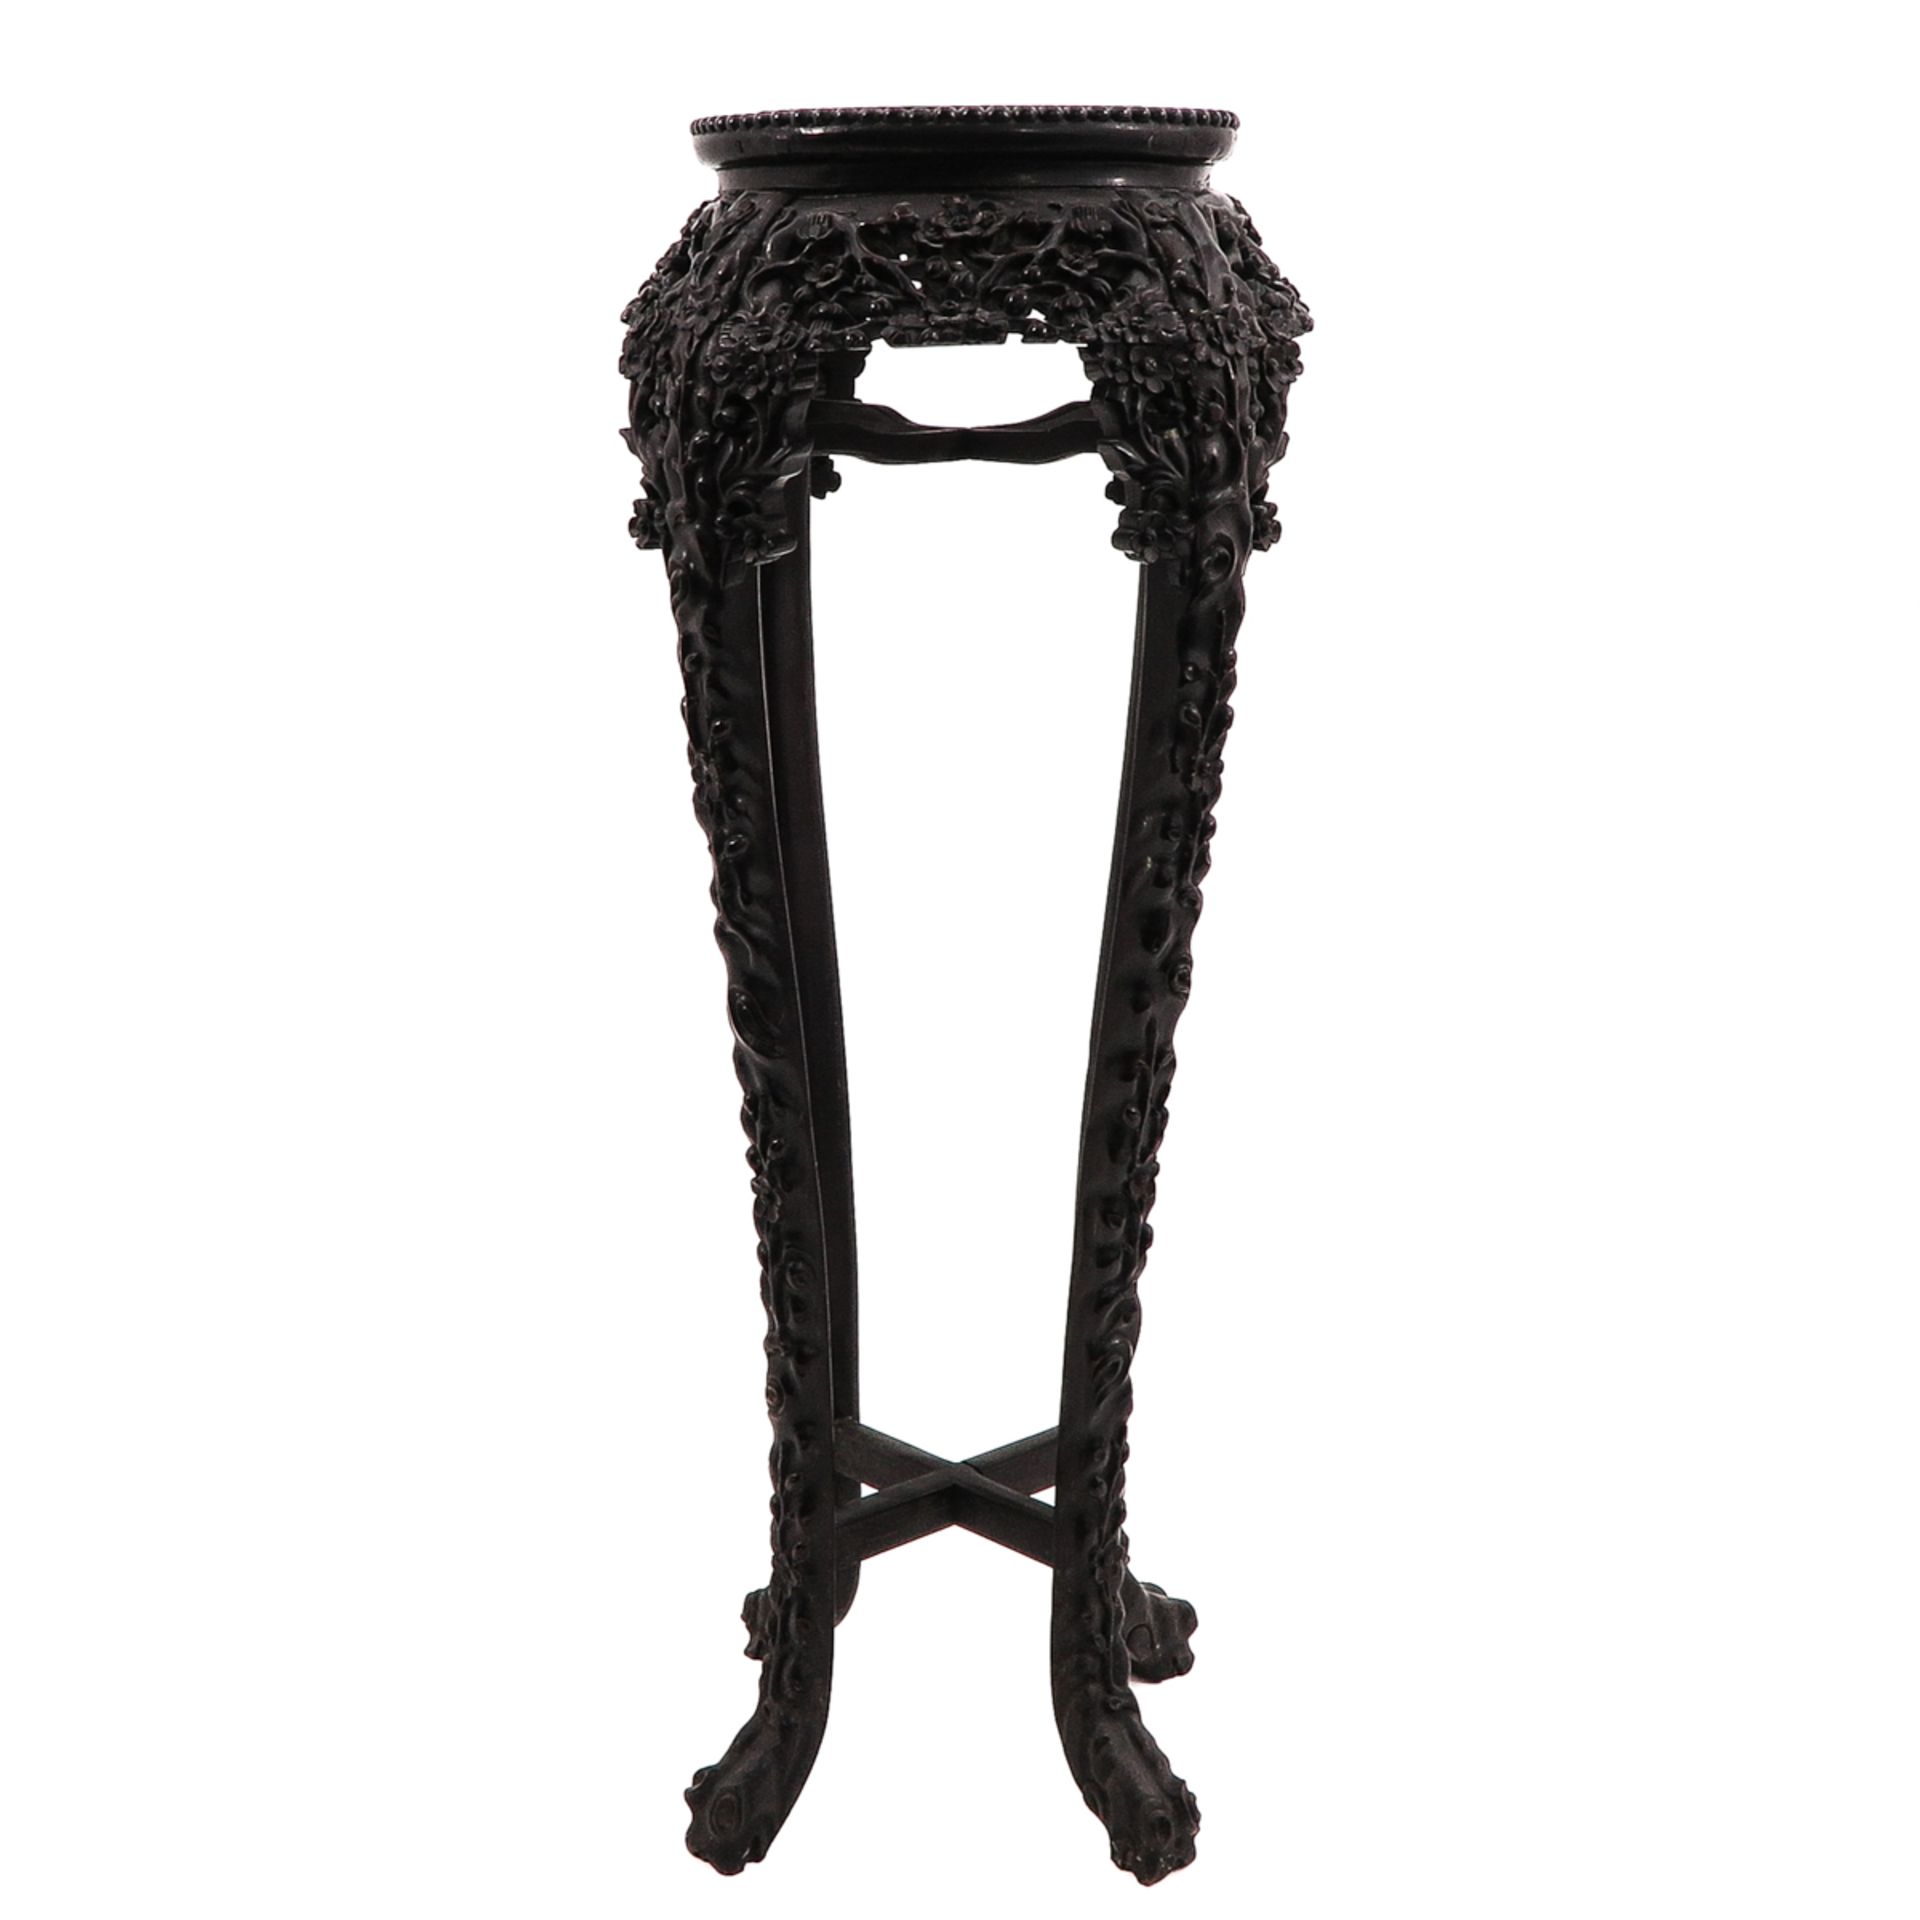 A Carved Round Marble Top Side Table - Image 2 of 5